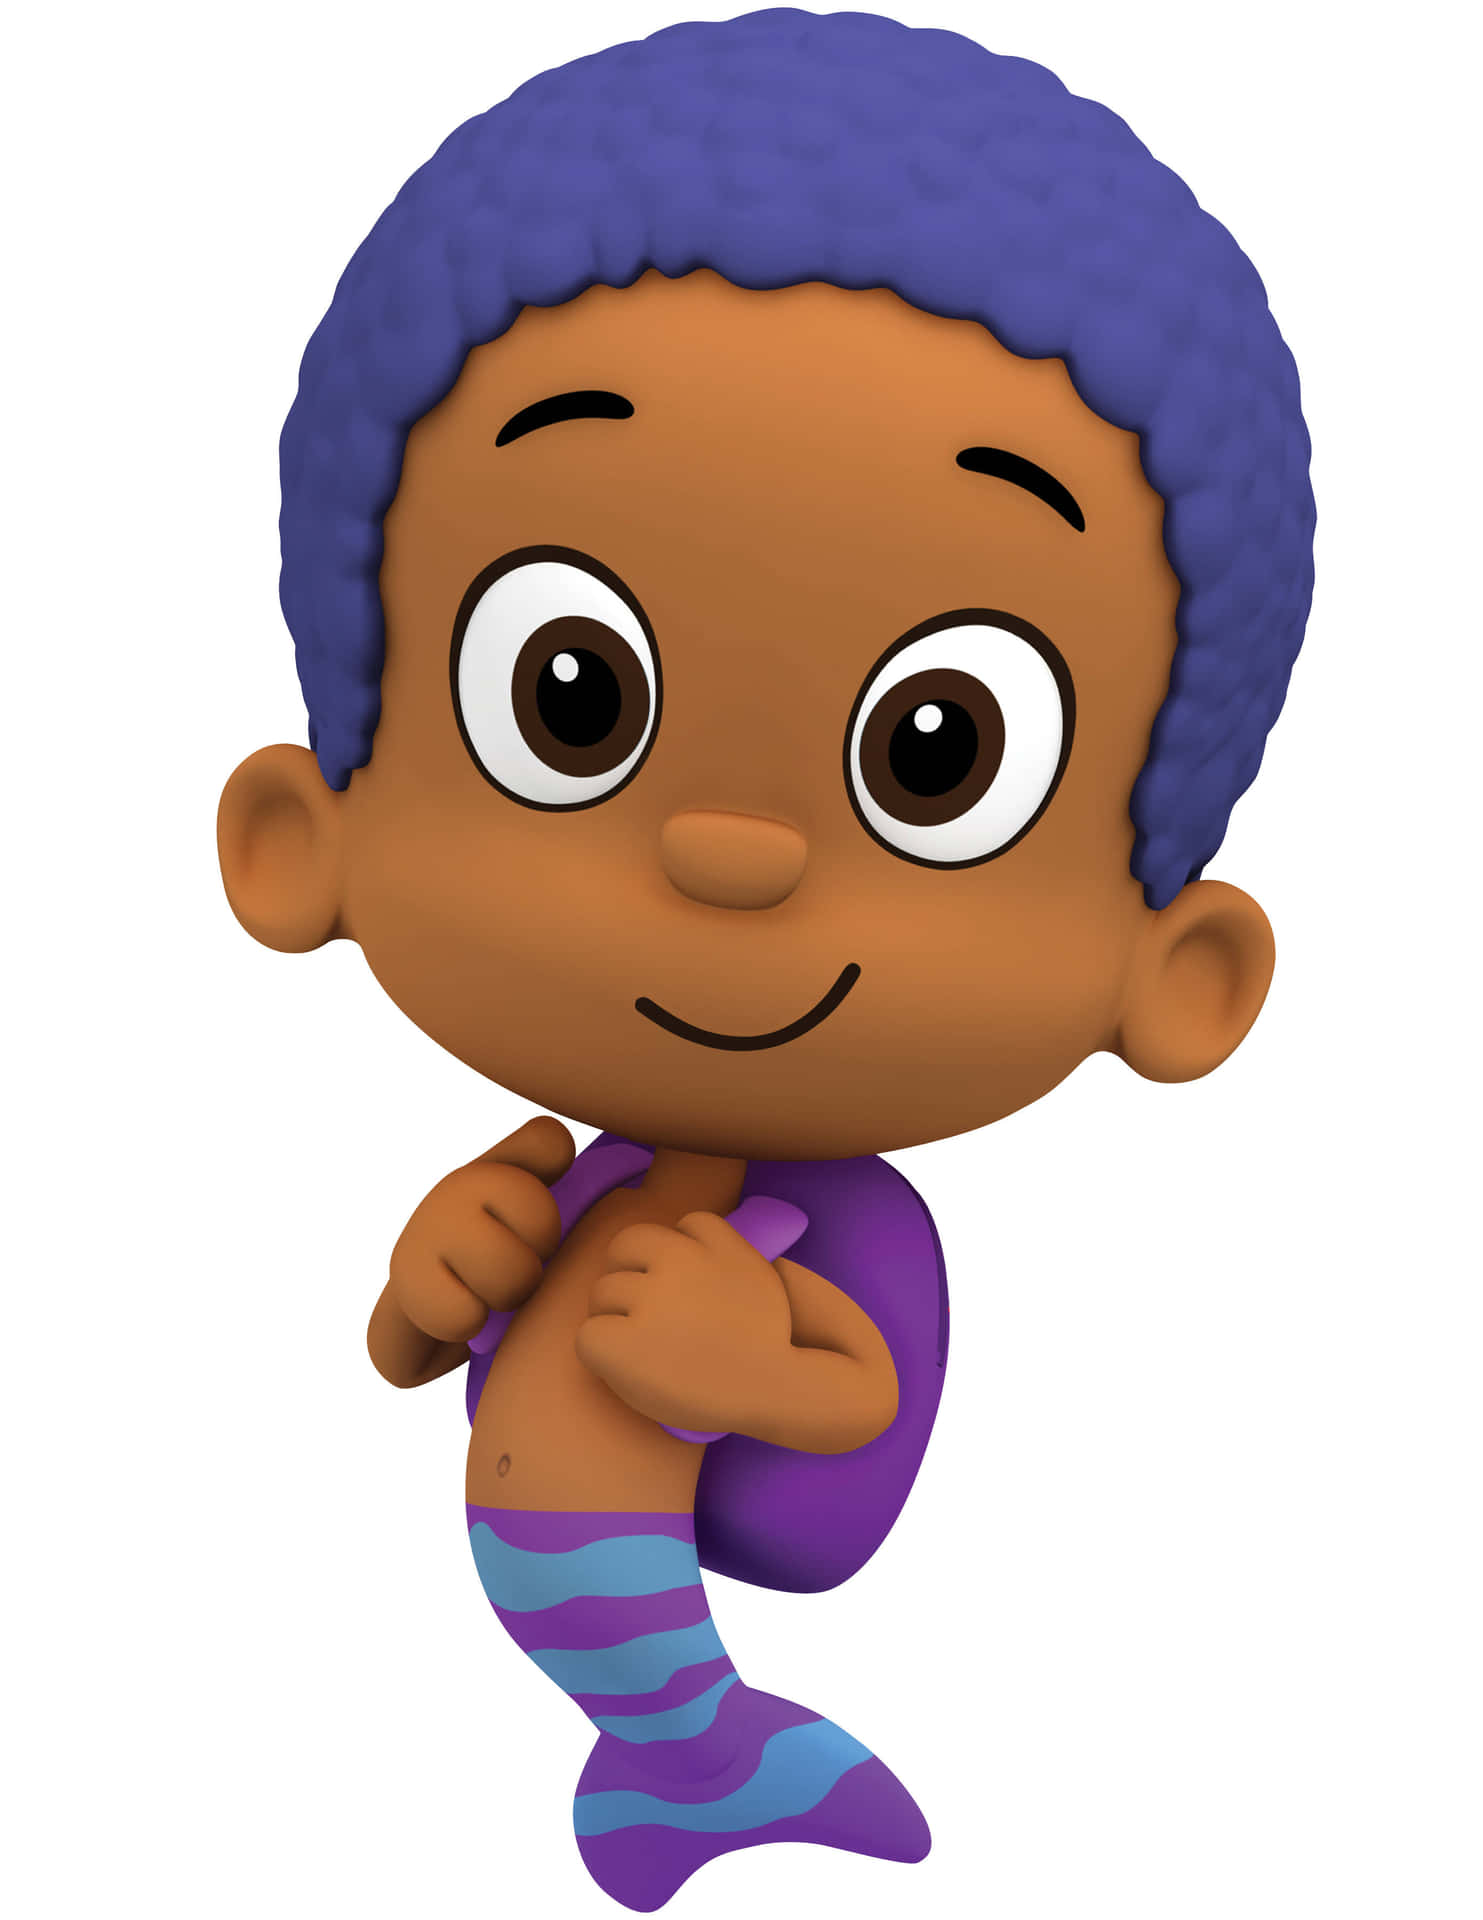 Molly from Bubble Guppies smiles and looks ahead with anticipation